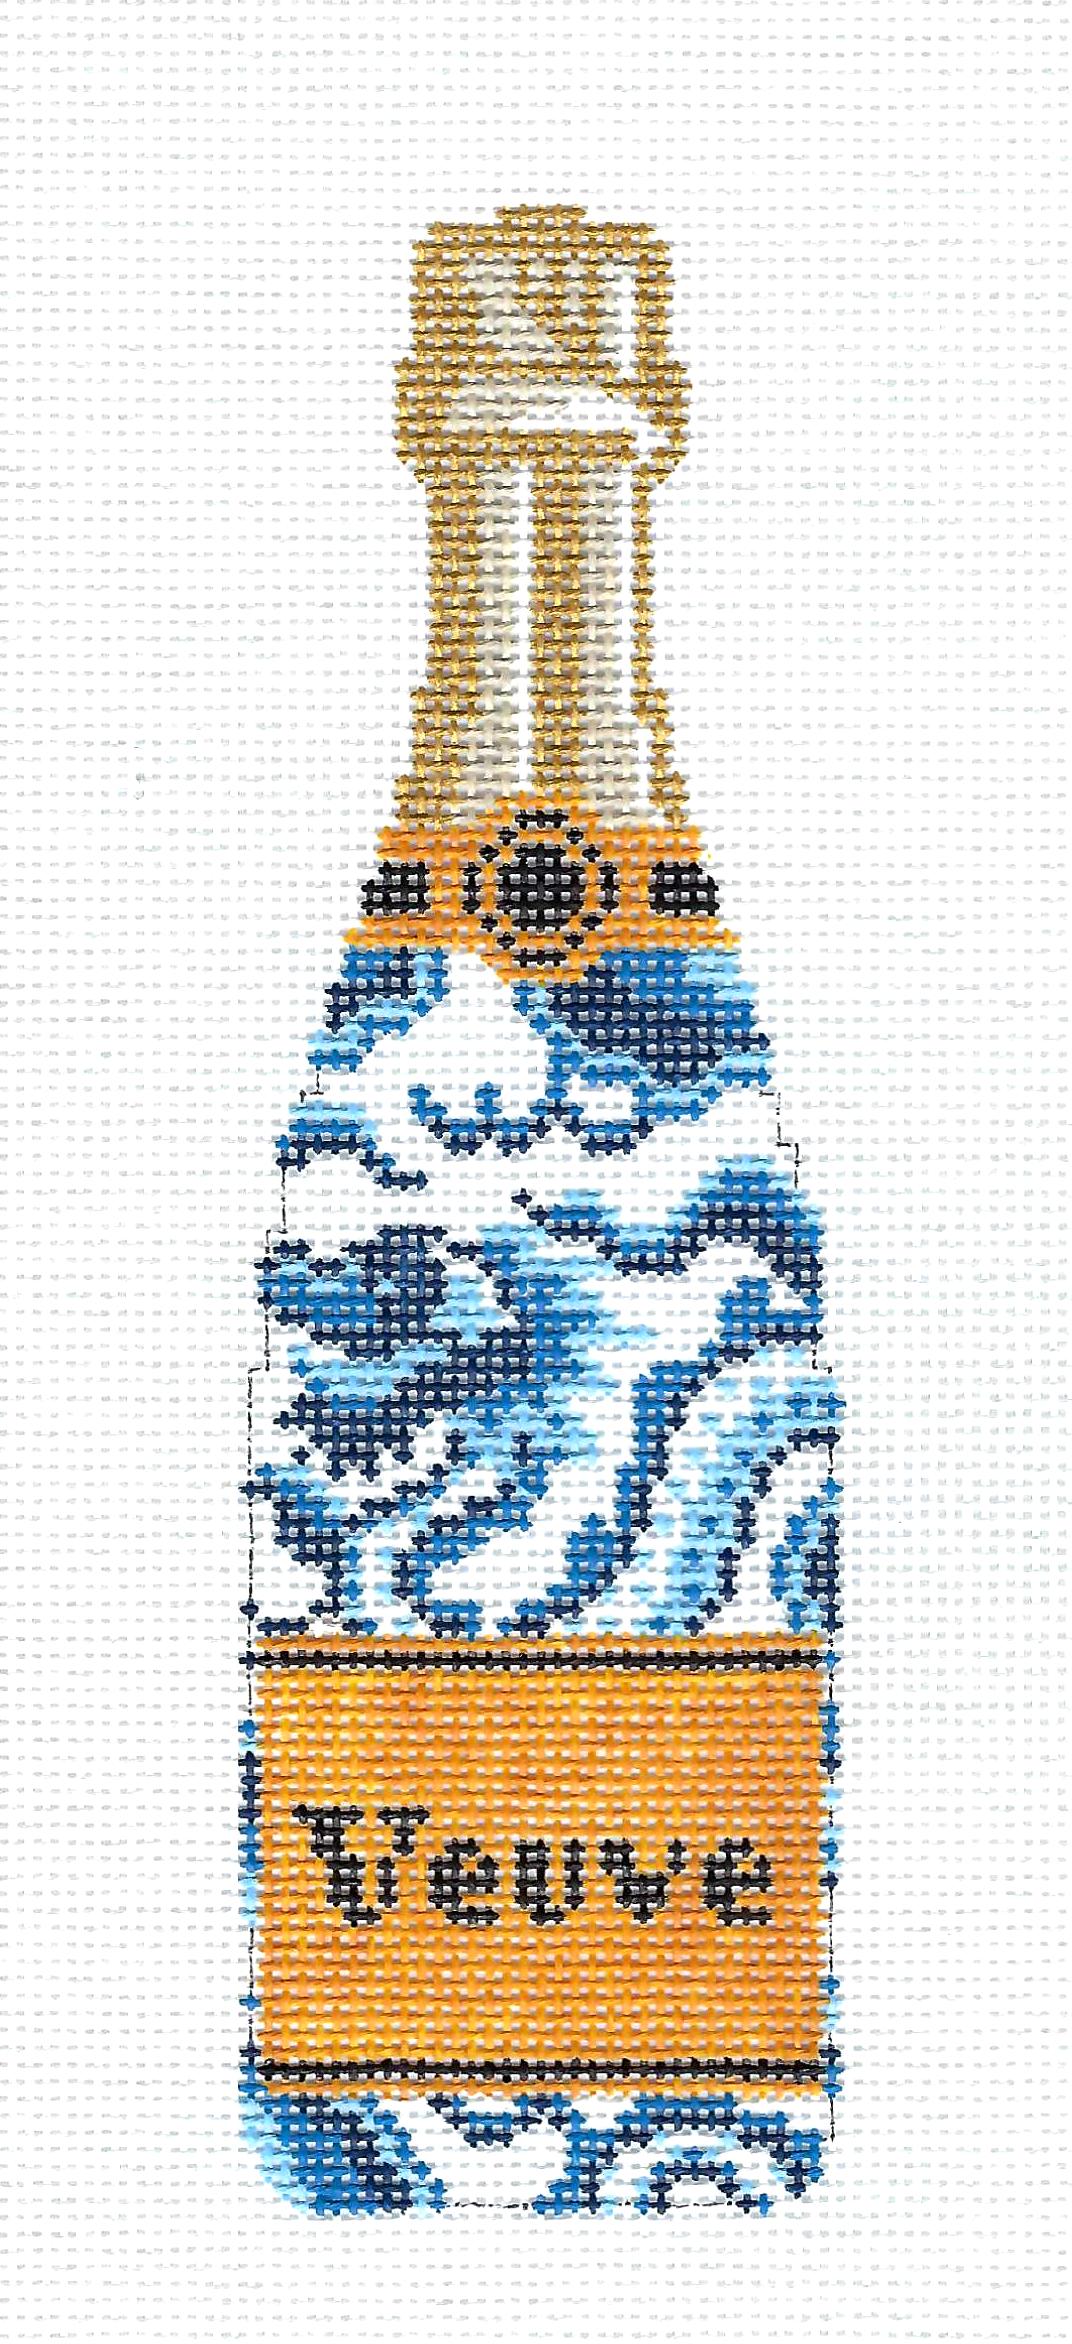 "Veuve" Champagne Bottle in Chinoiserie Blue Dragon 18 mesh handpainted Needlepoint Canvas by C'ate La Vie